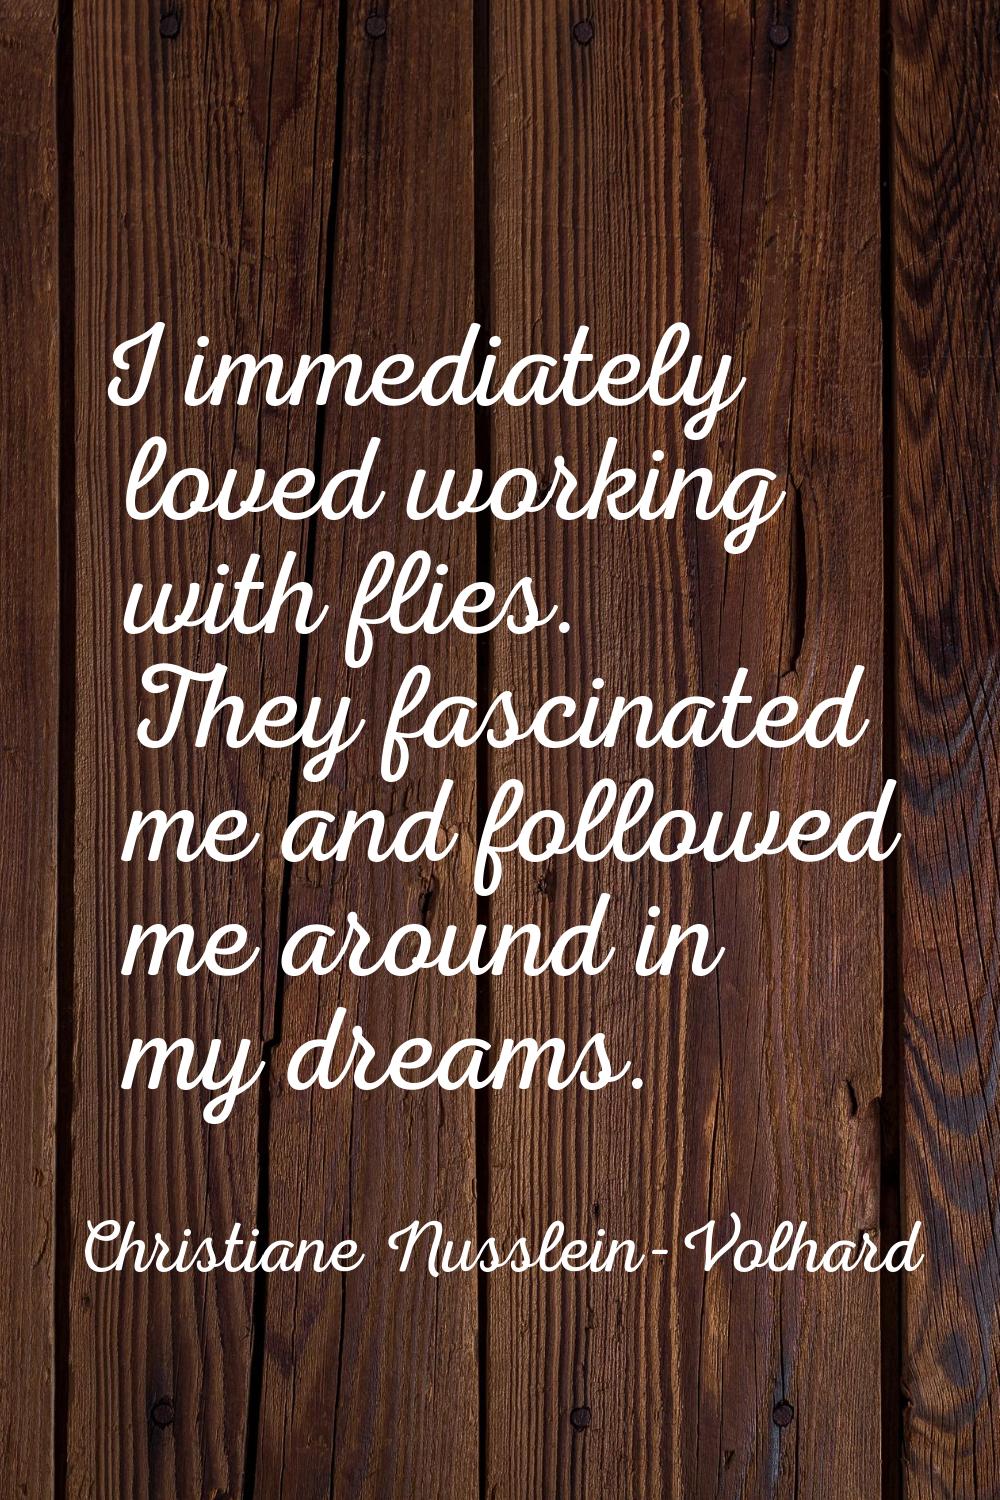 I immediately loved working with flies. They fascinated me and followed me around in my dreams.